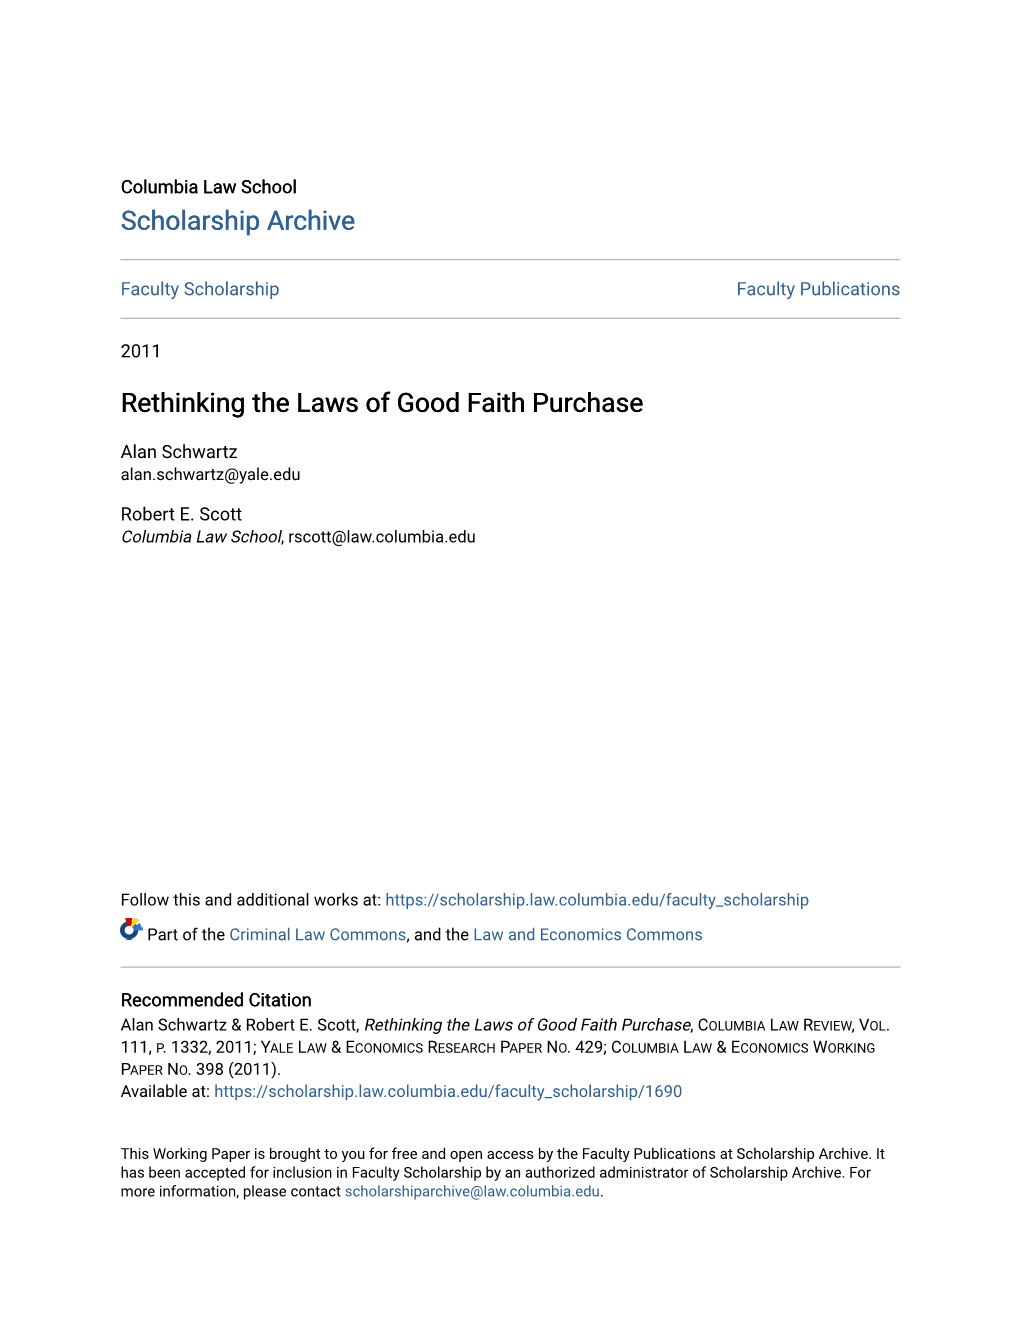 Rethinking the Laws of Good Faith Purchase